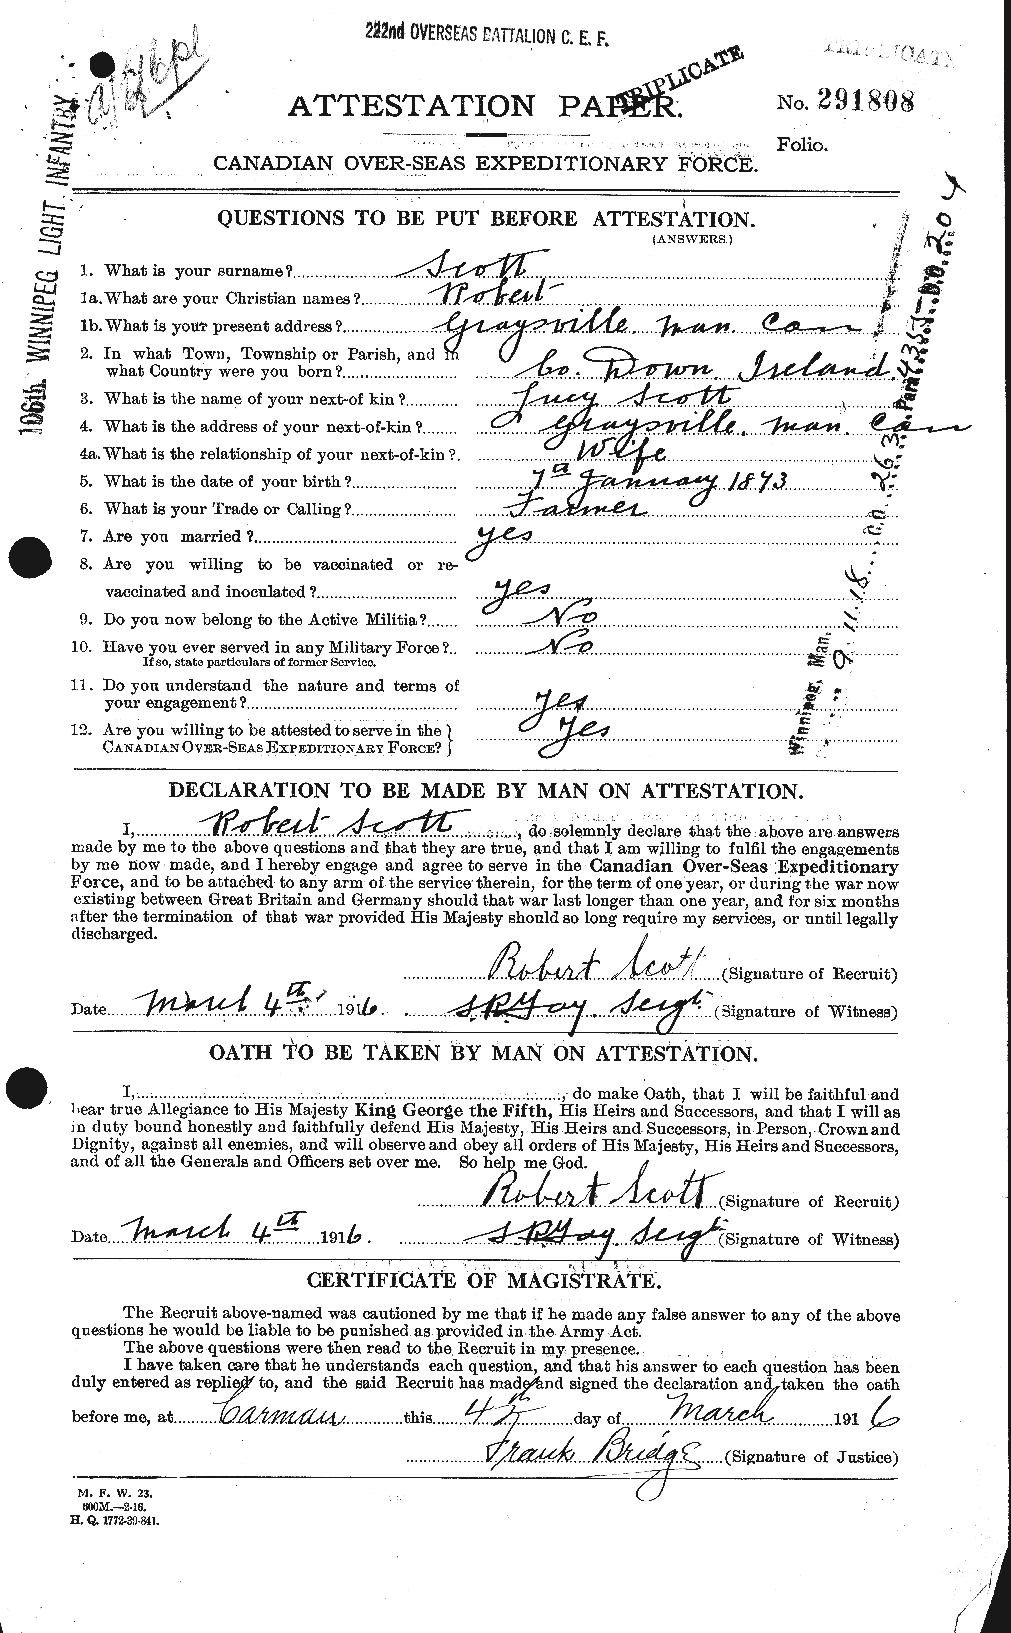 Personnel Records of the First World War - CEF 089223a